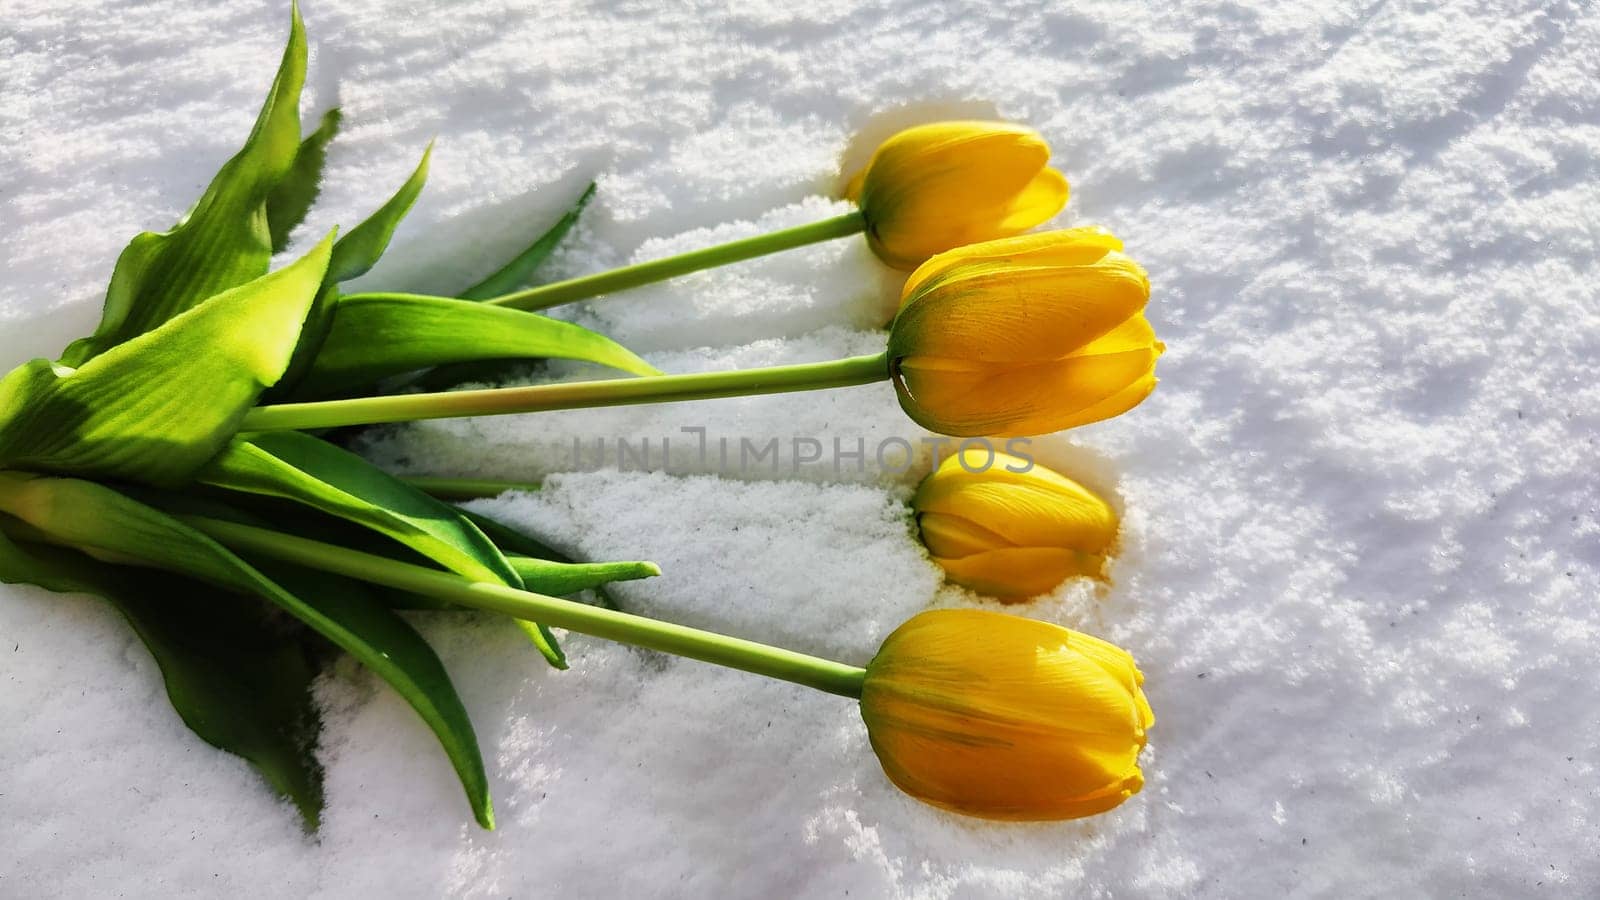 Bouquet of beautiful yellow tulips on snow on cold sunny day. Concept of opposite. Winter and flowers. International Women's Day on March 8, Mother's Day, Valentine's Day. Card, background, copy space by keleny